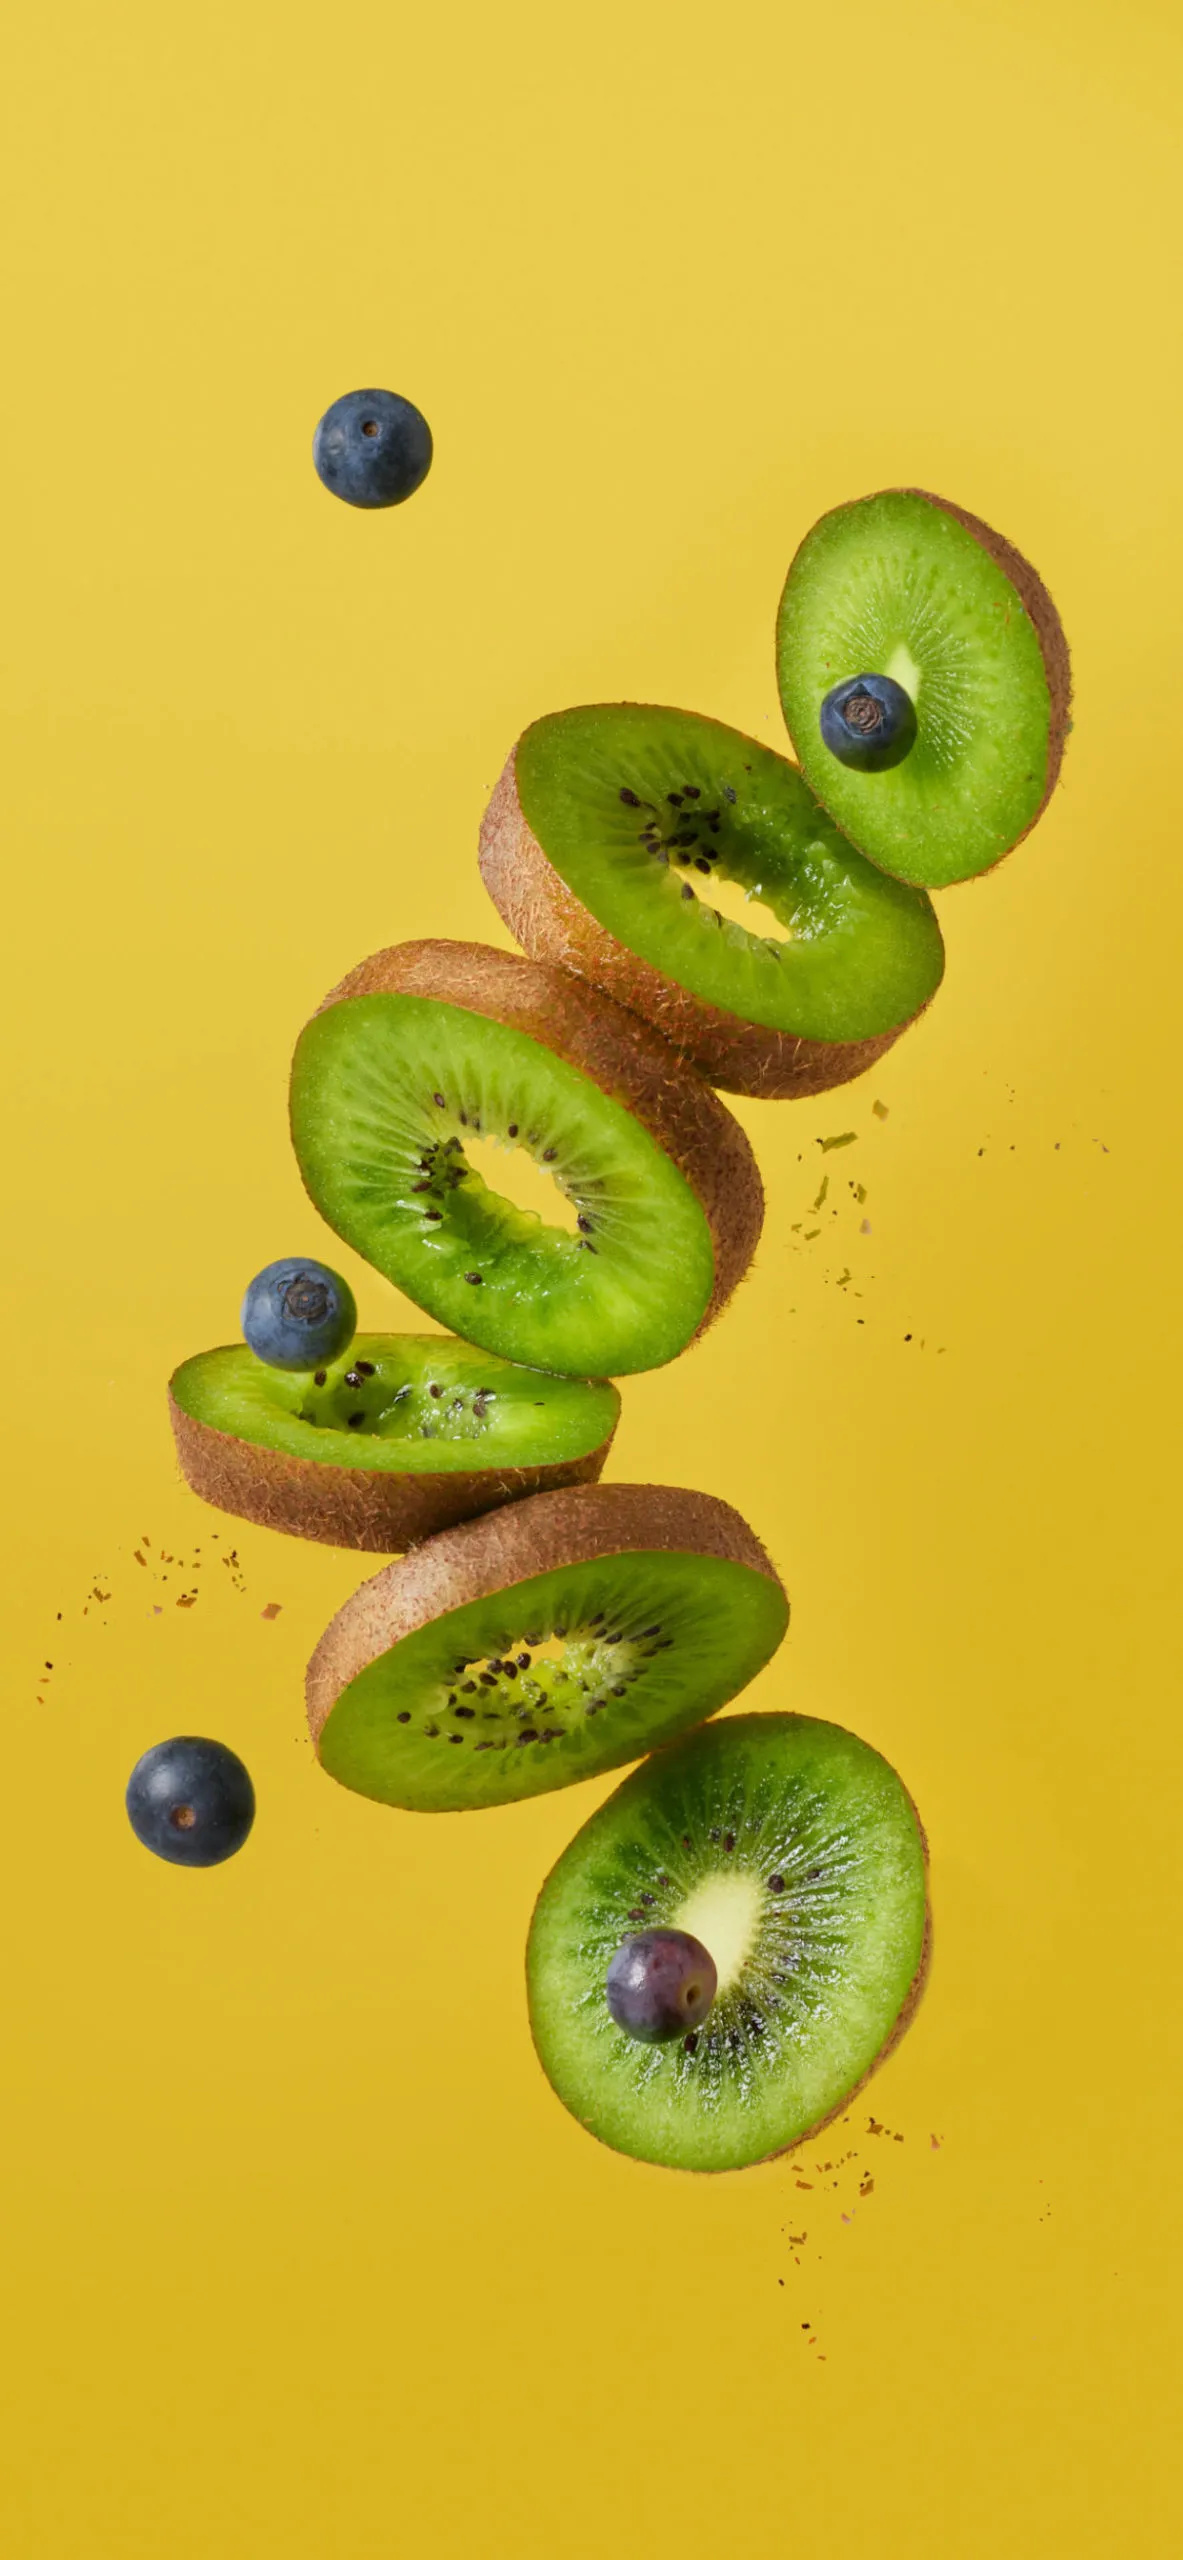 Fruits wallpaper iPhone, High quality image, Vibrant and fresh, Stunning visual, 1190x2560 HD Handy